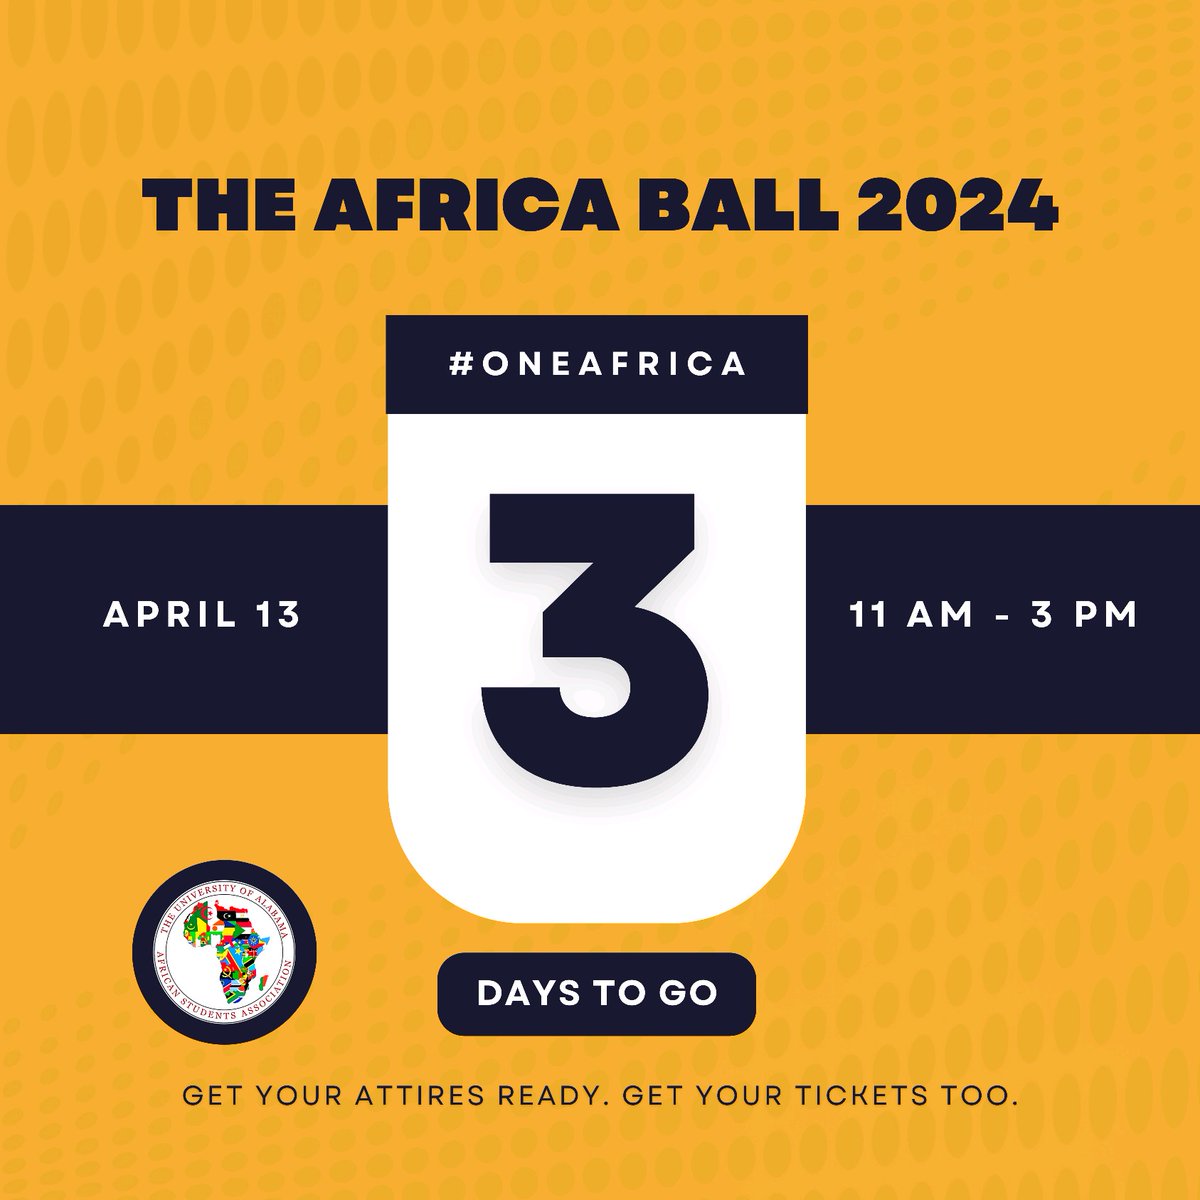 Get your attires ready. Get your tickets too. 3 days to The Africa Ball 2024 🕺🏾💃🏾 Click the link below to get your ticket. 🎟️🎫 eventbrite.com/e/africa-ball-… #OneAfrica #loveandbanter #alabama #tuscaloosa #africa #heritage